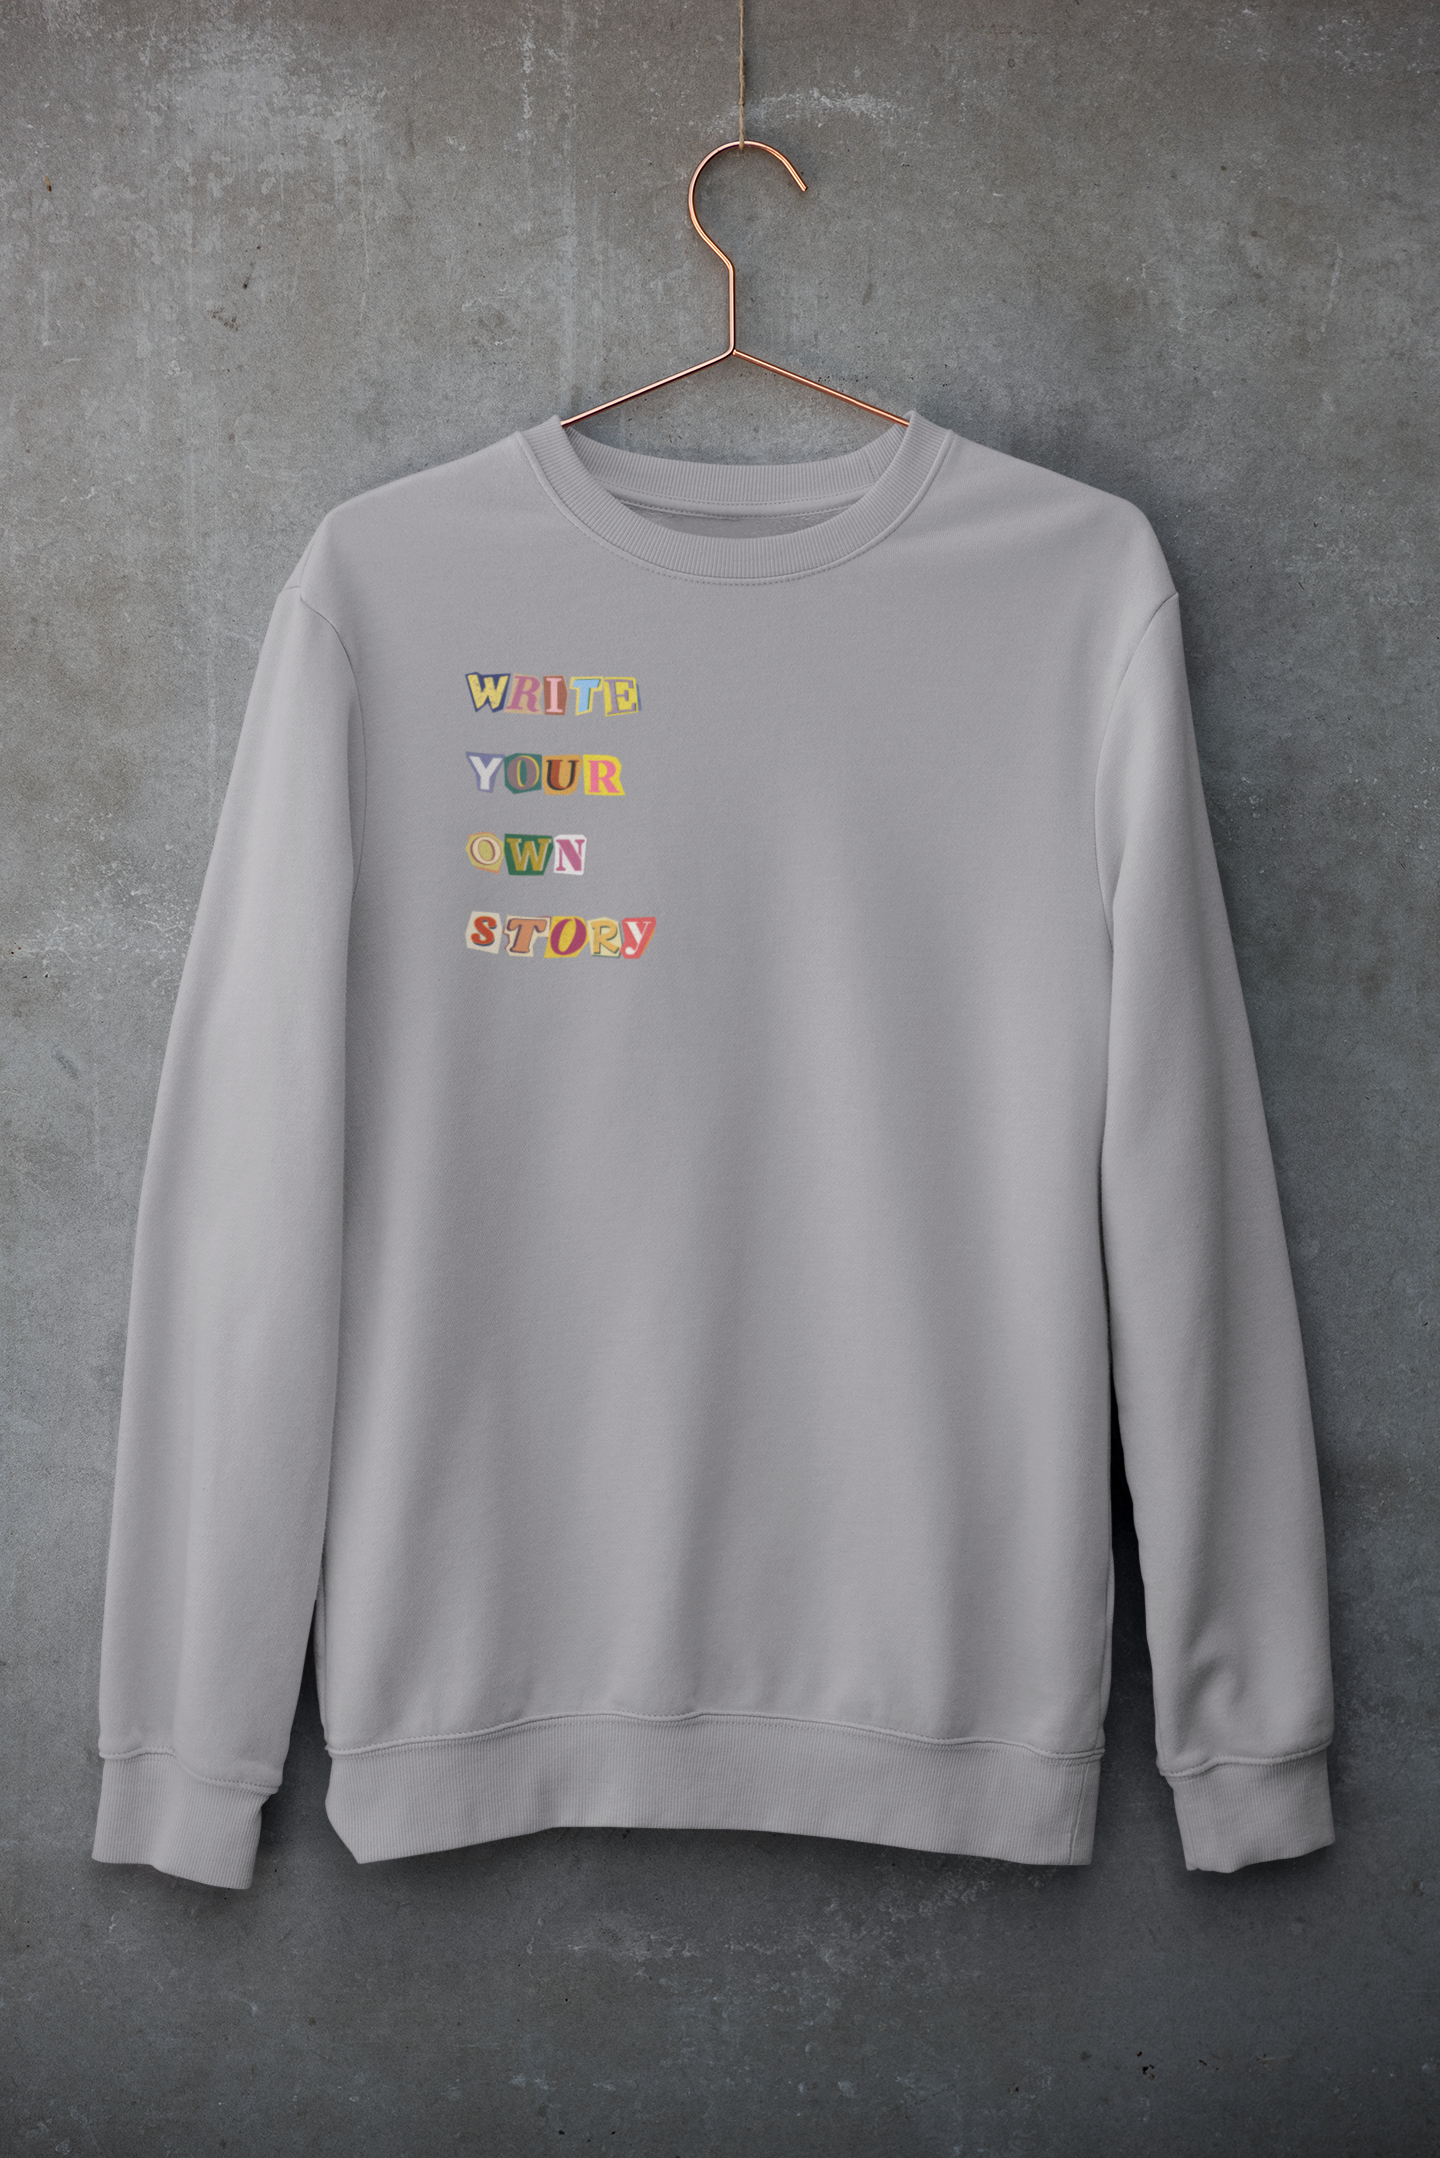 'Write Your Own Story' Crewneck